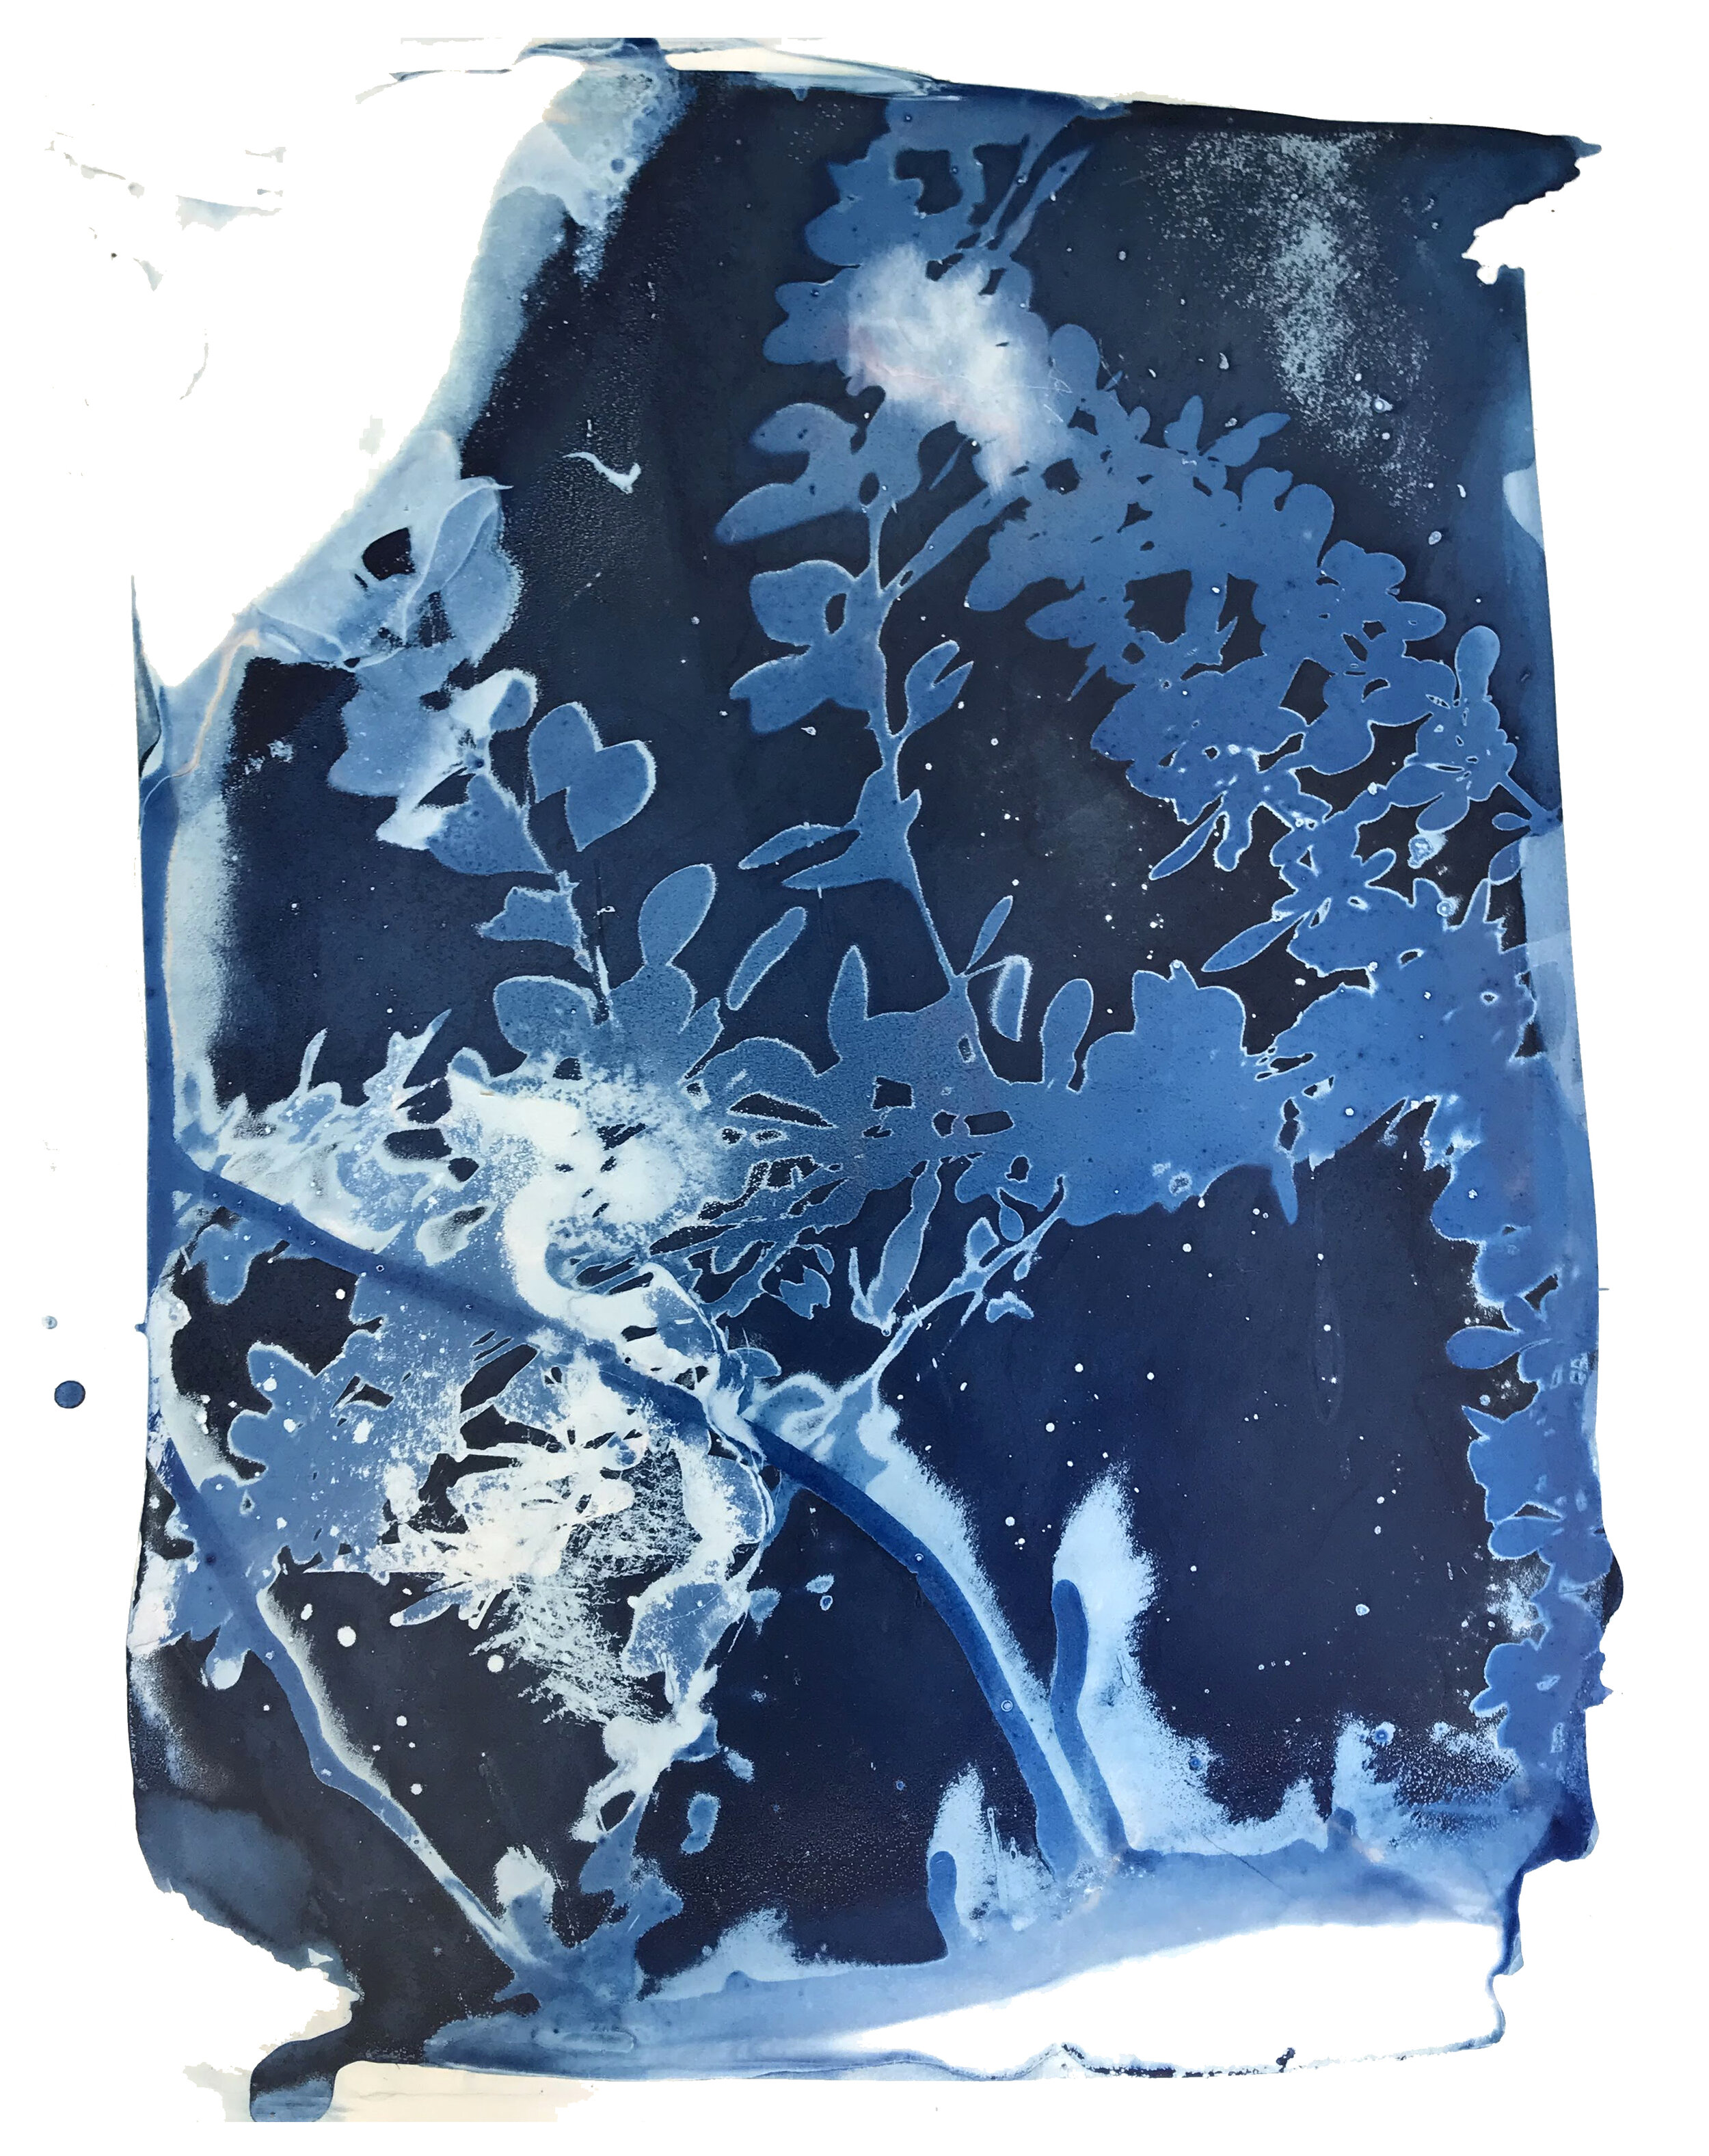  Gin Stone,  Untitled with Branch  , Cyanotype on yupo, 11 x 14 x 1 